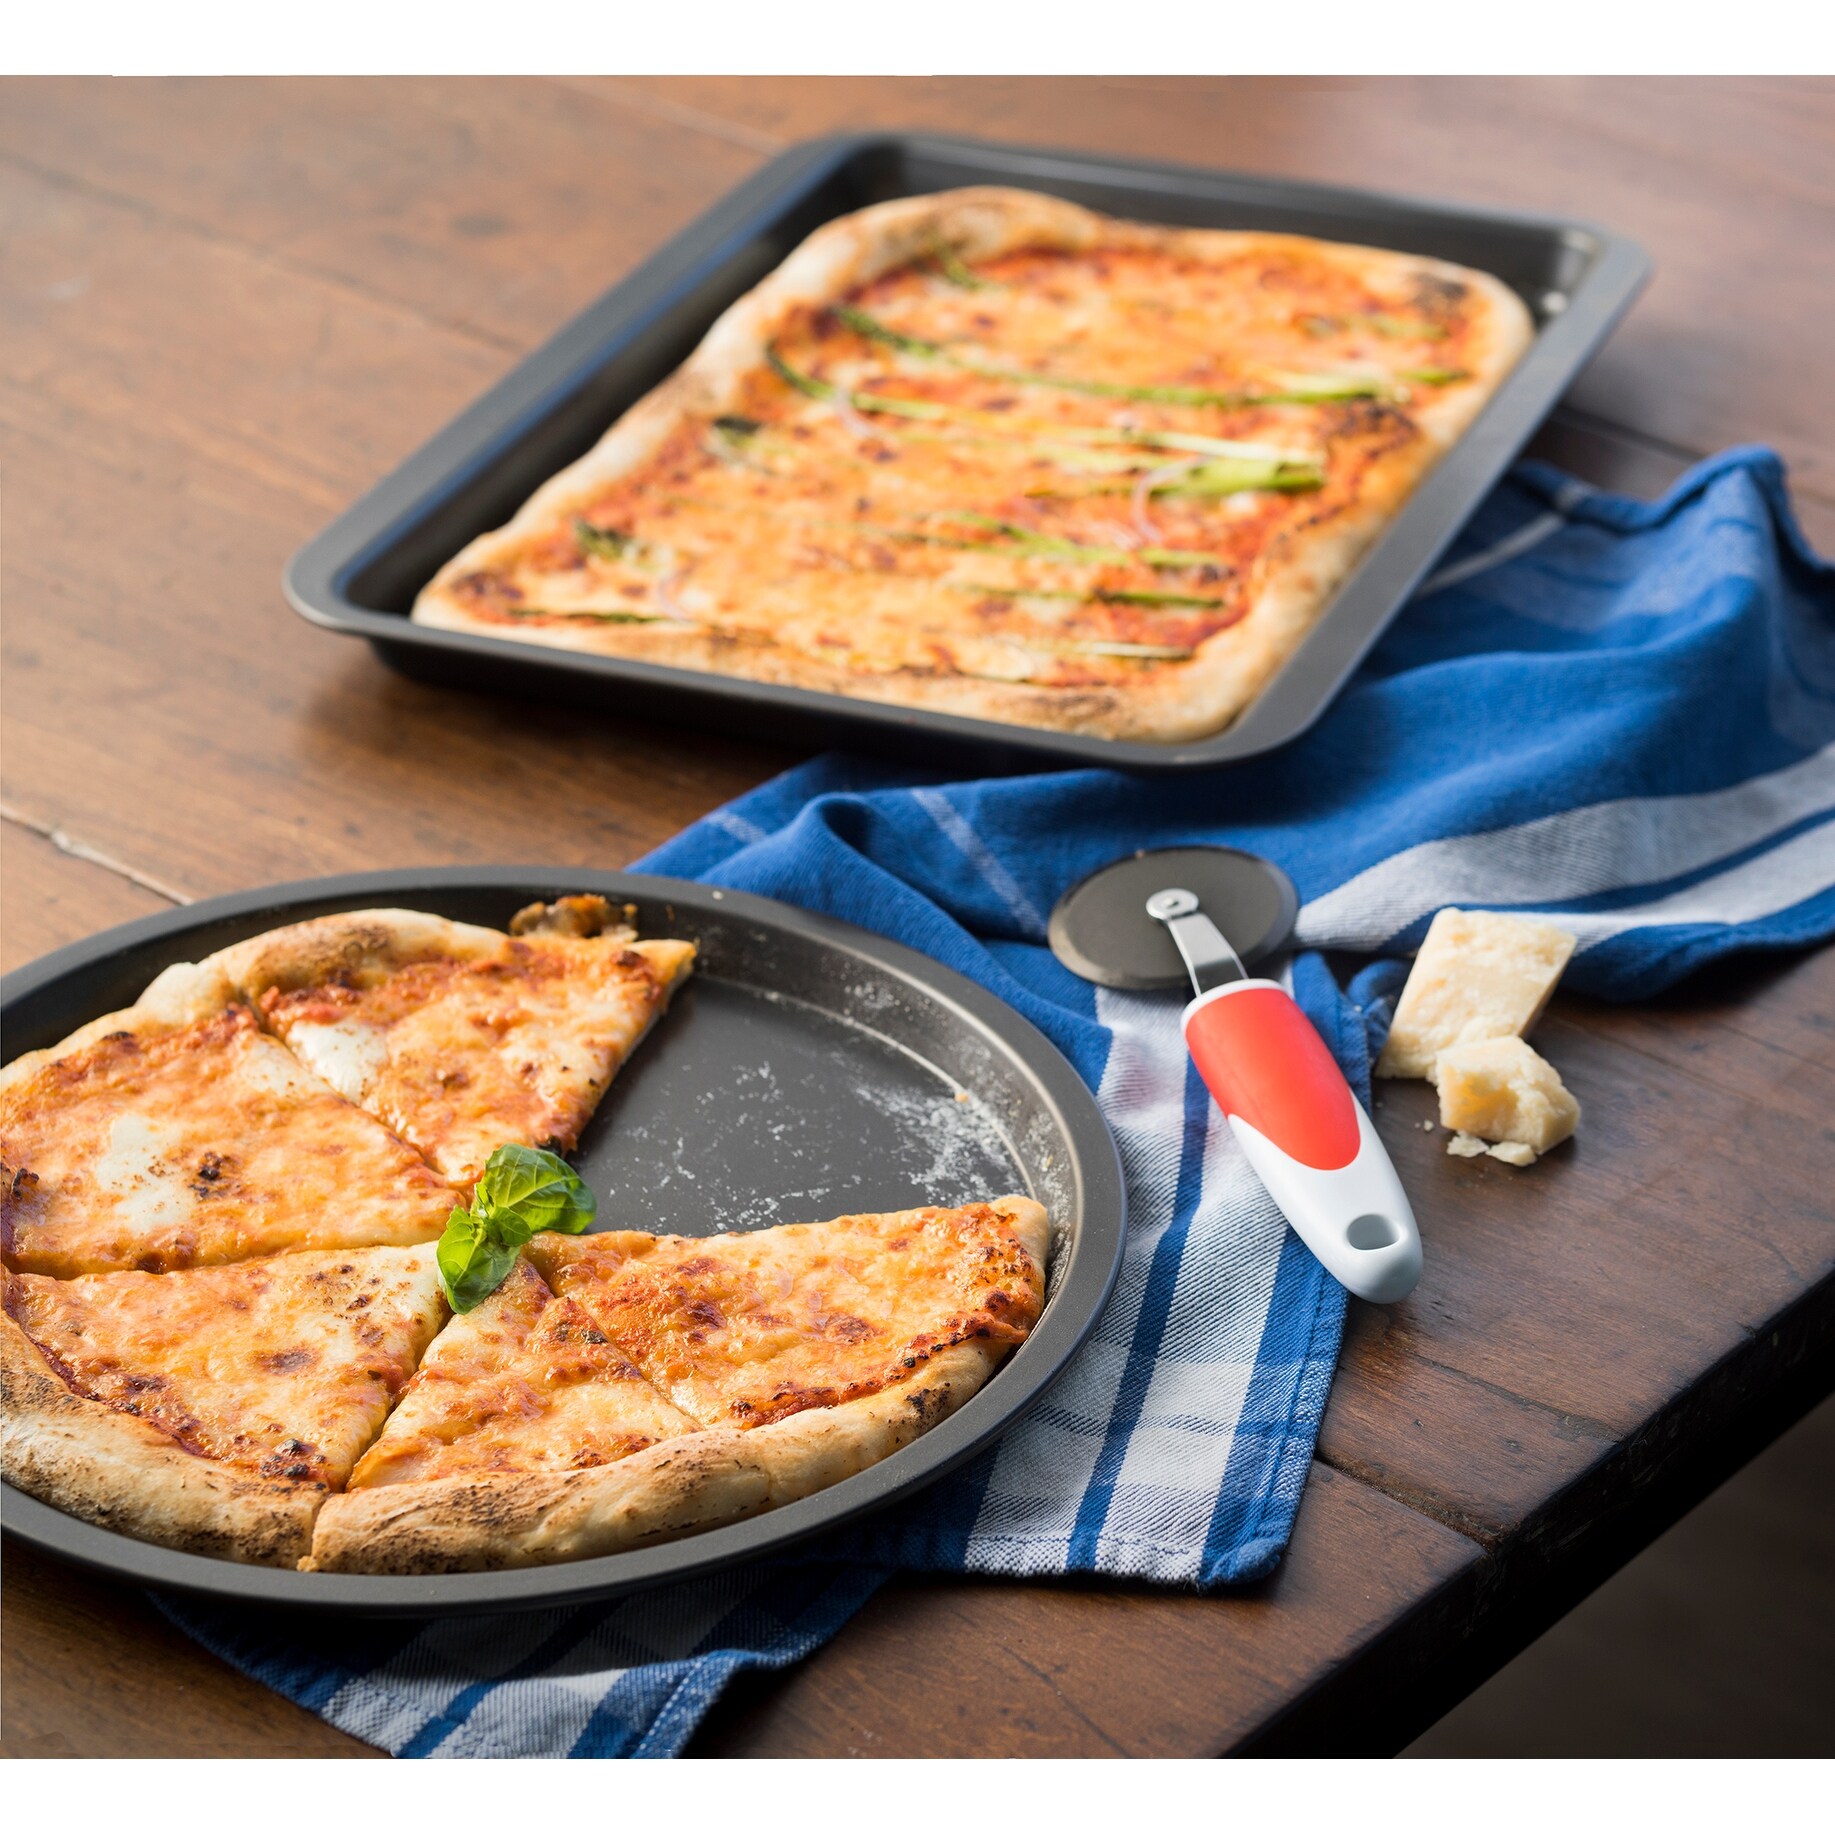 https://ak1.ostkcdn.com/images/products/is/images/direct/c18e6c00aa5d864aa5f5253b294d7d4692f911ac/Ballarini-cookin%27Italy-Pizza-Pan-Set.jpg